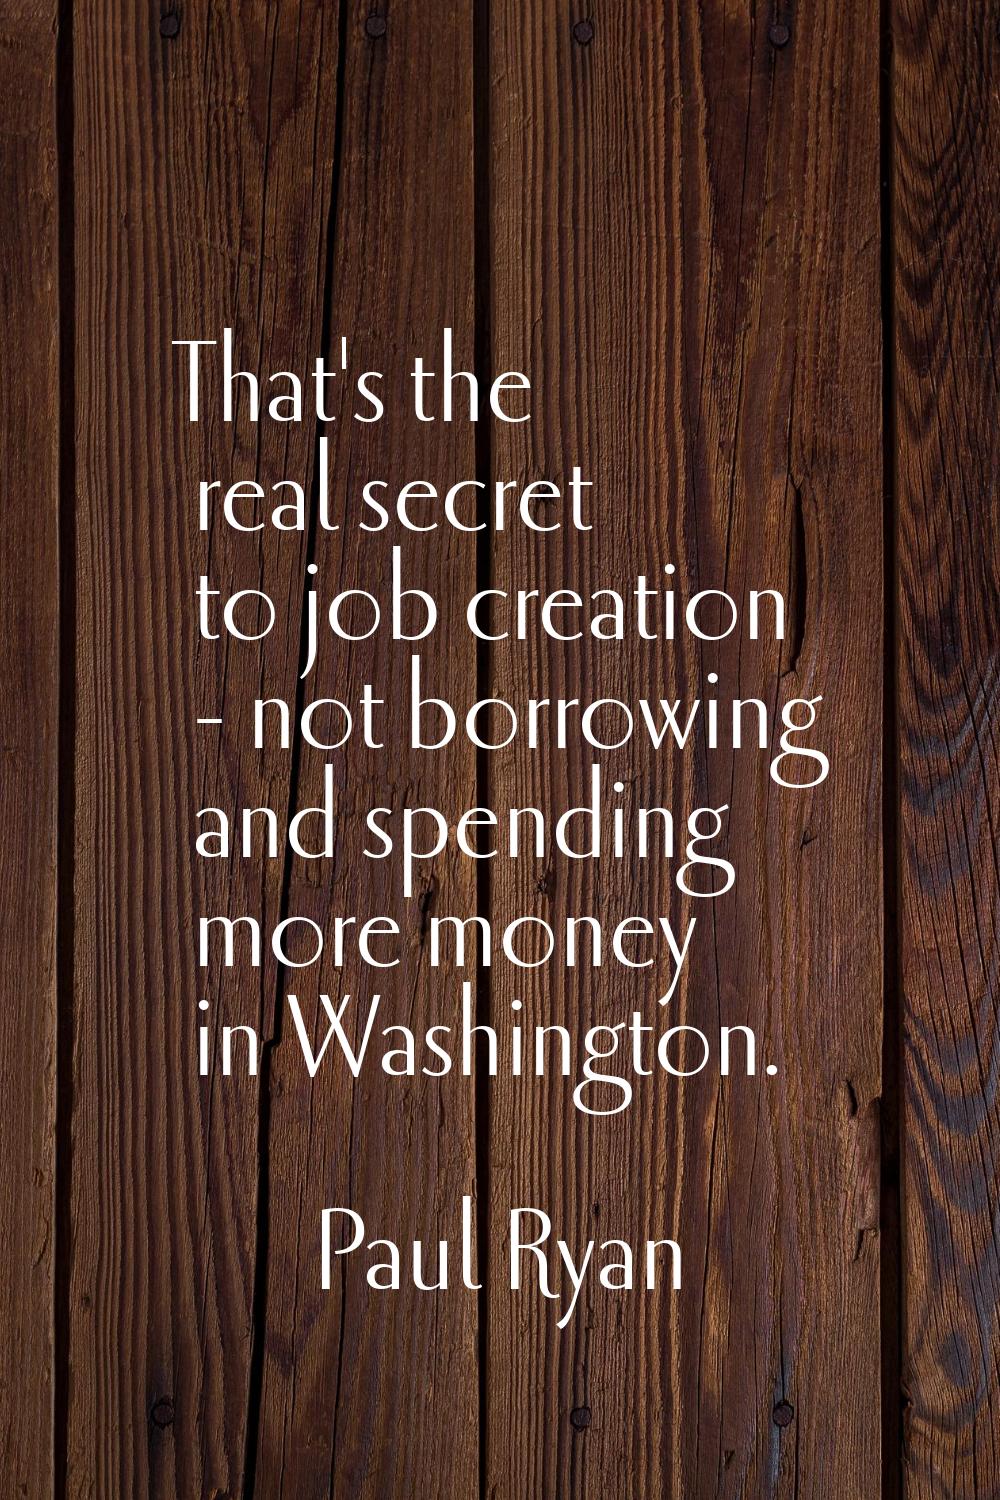 That's the real secret to job creation - not borrowing and spending more money in Washington.